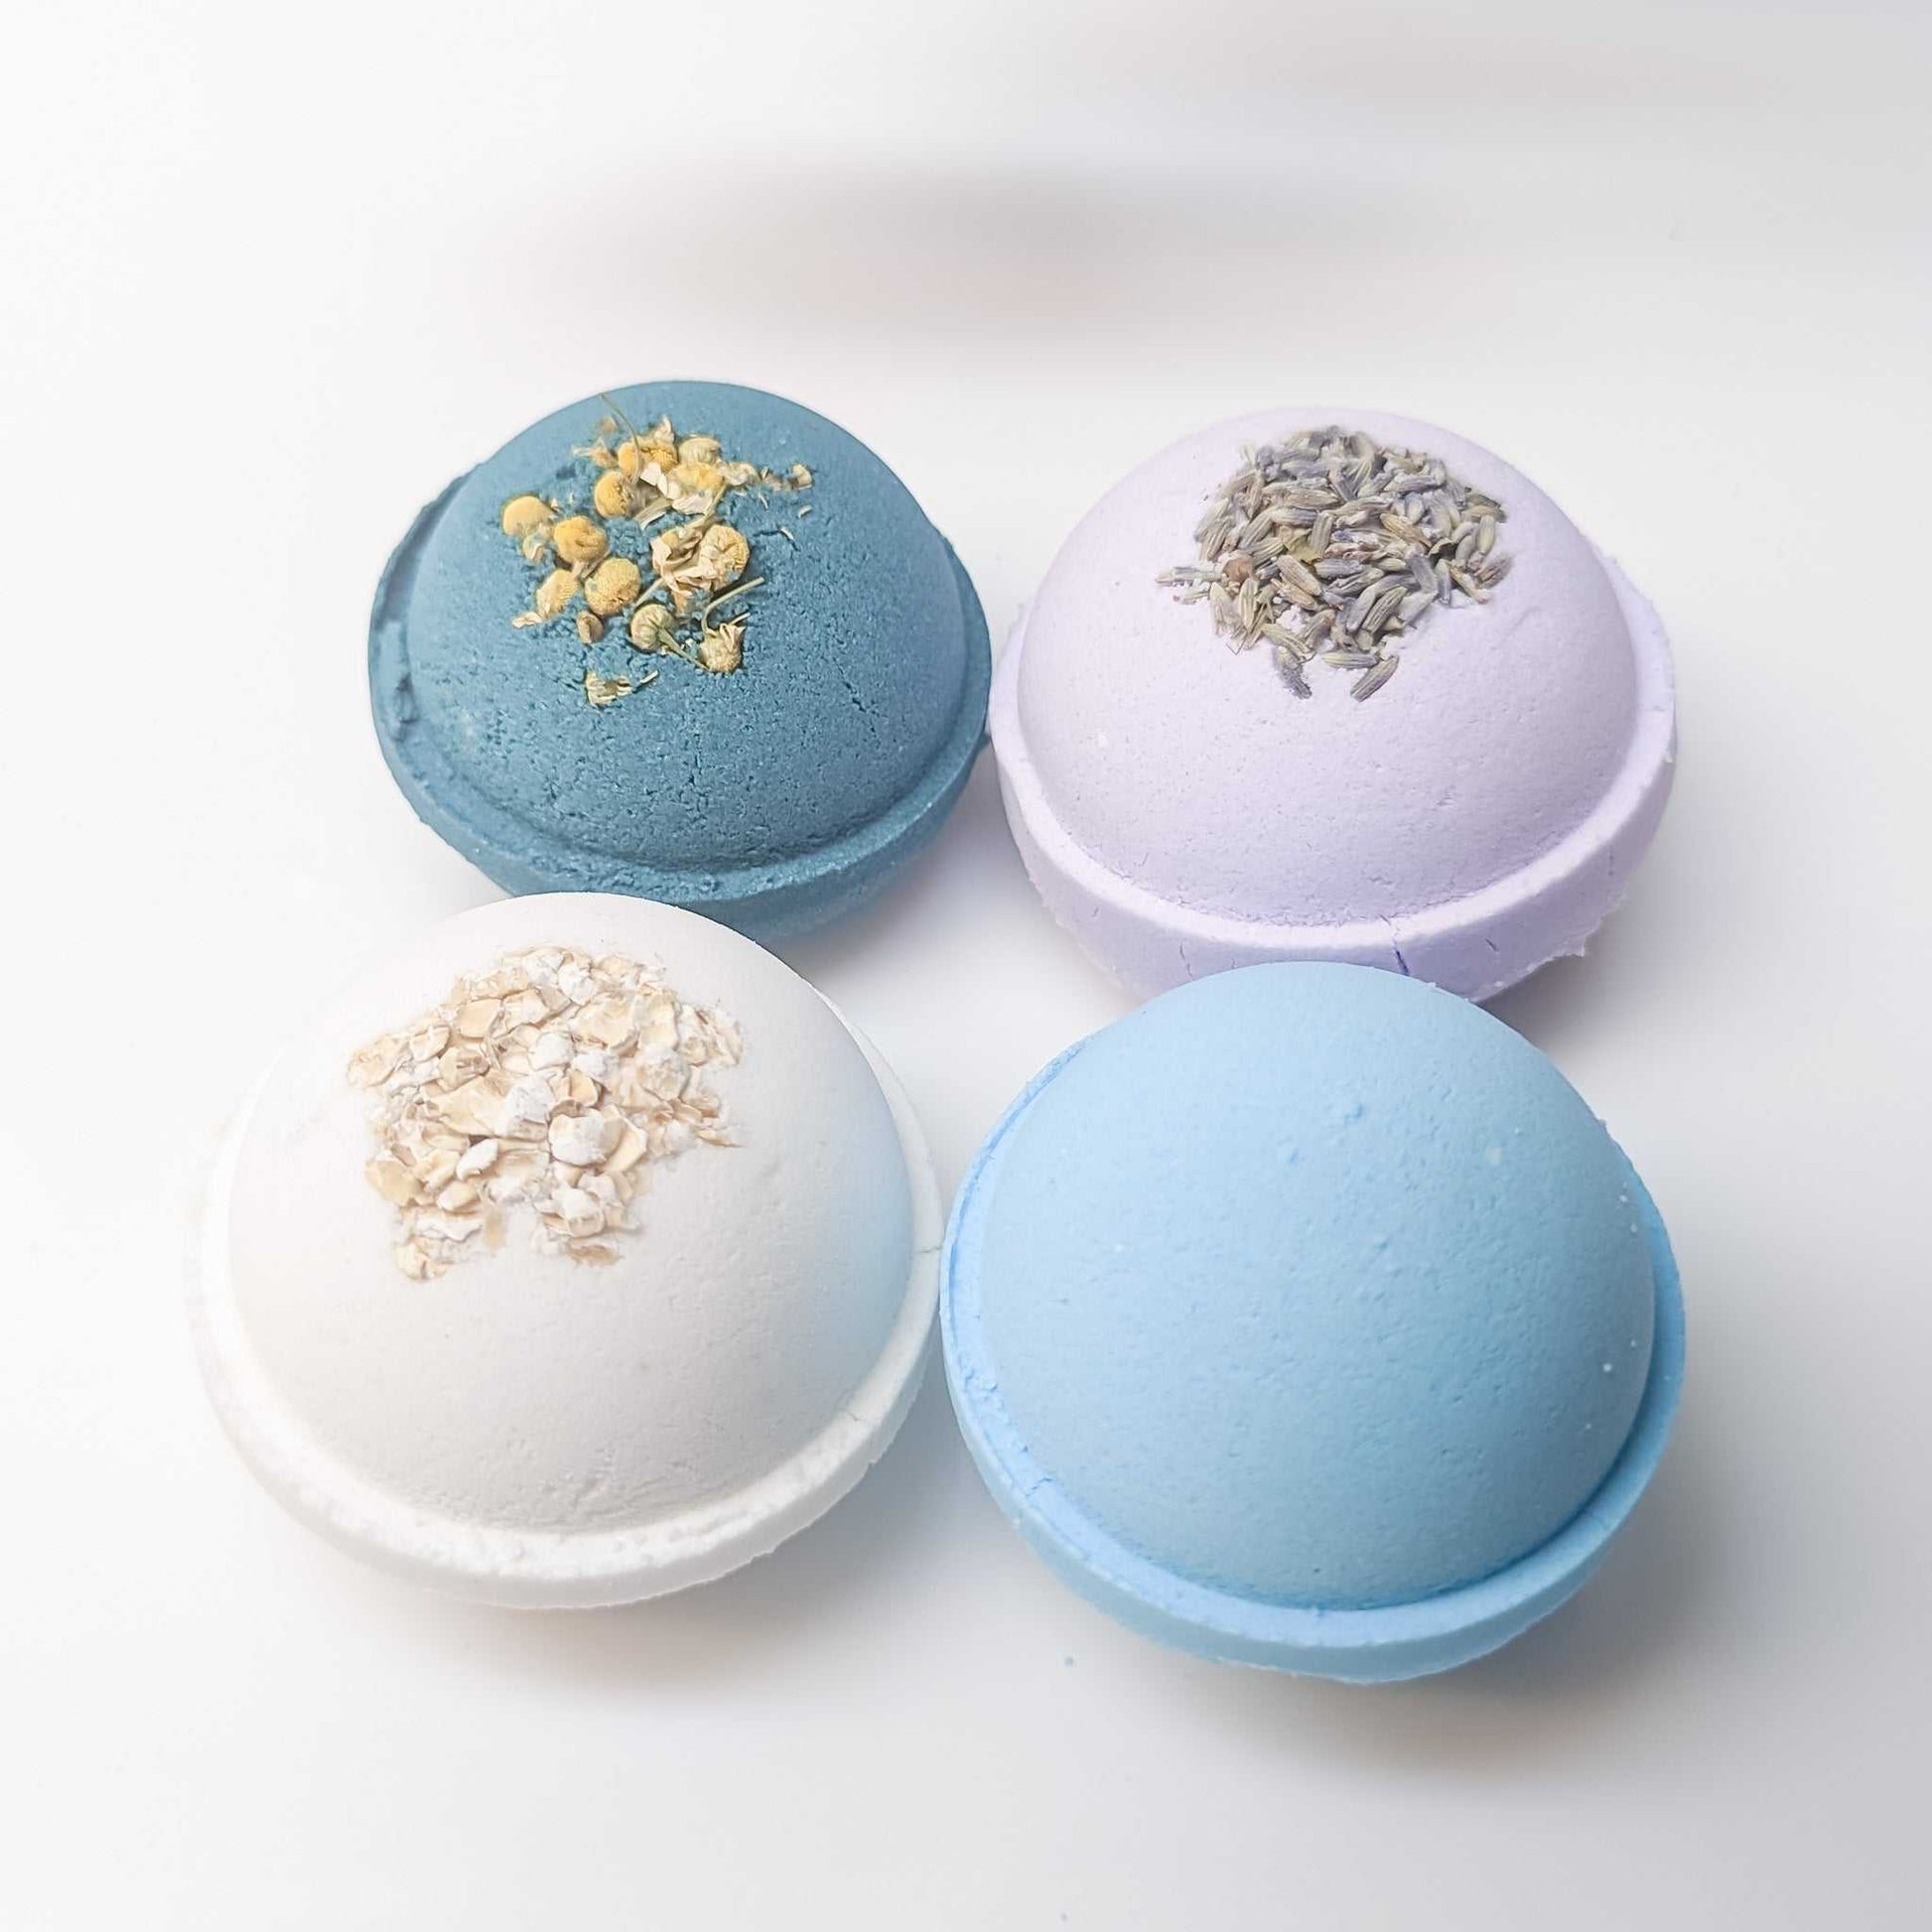 Canadian-made Oatmeal, Milk and Honey Bath Bomb offering nourishing hydration for dry skin.